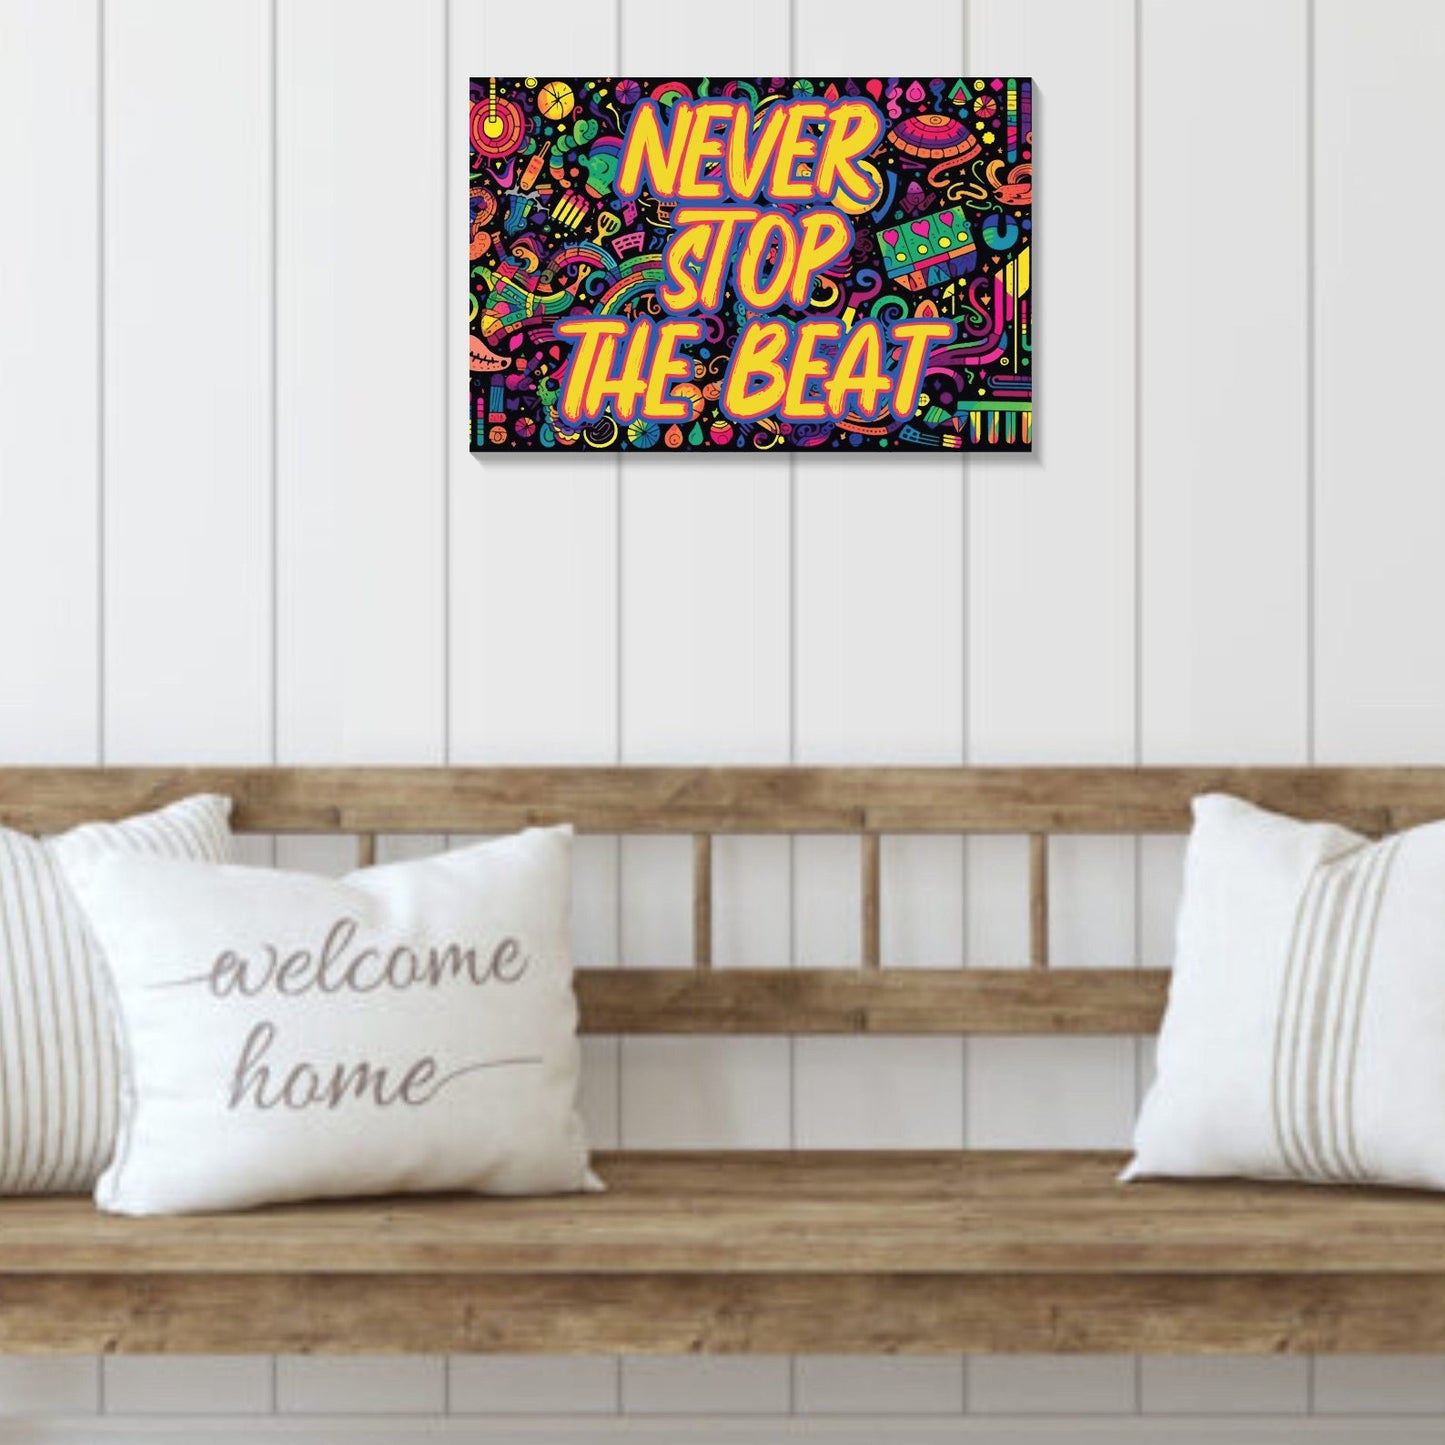 Wooden "Never Stop The Beat" Decor Sign For Indoor Display - 7.5In X 5In - Fun And Funky Patterned Design Fun Door Sign